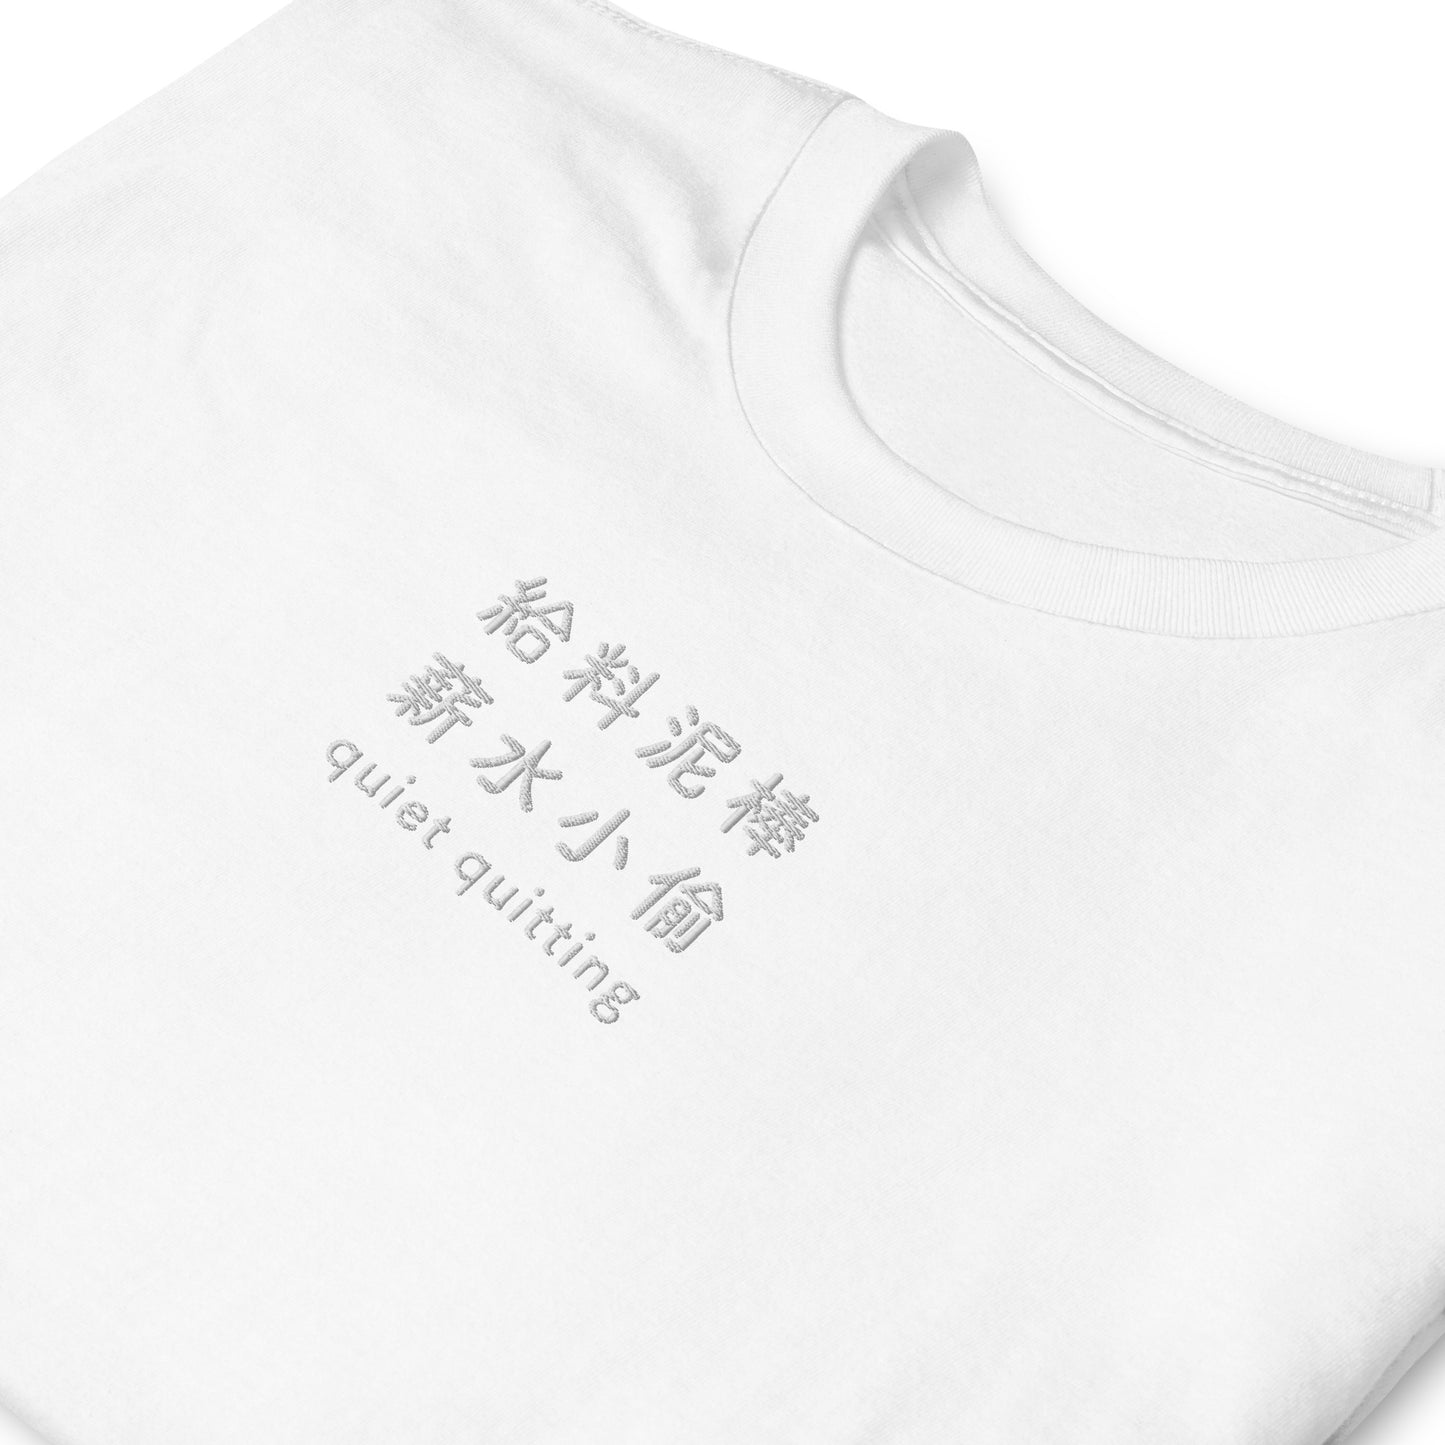 White High Quality Tee - Front Design with an White Embroidery "Quiet Quitting" in Japanese,Chinese and English